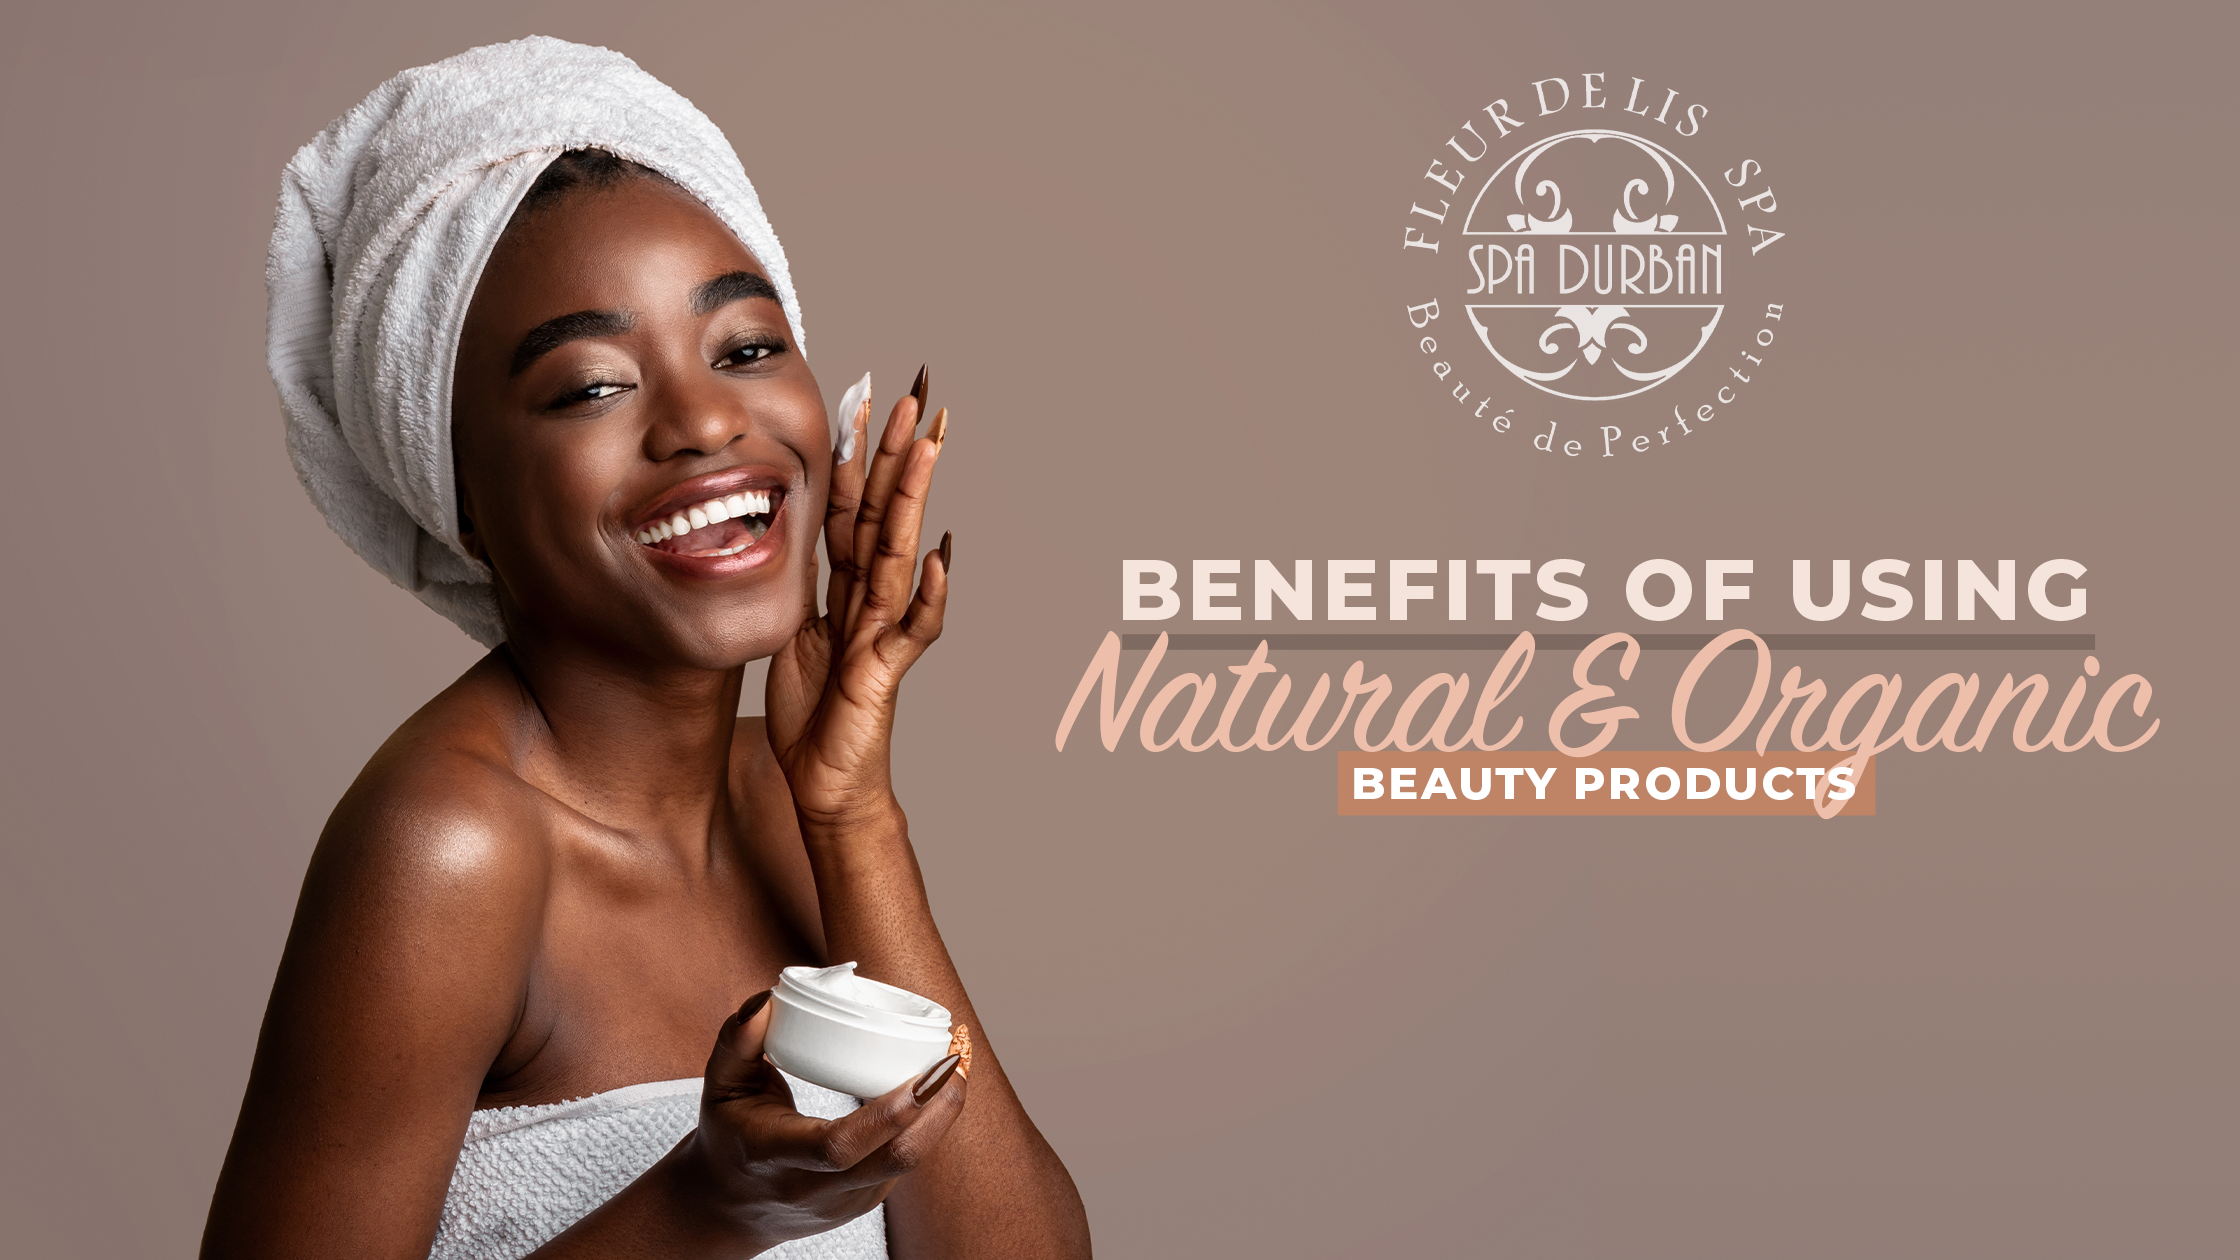 The Benefits of Using Natural and Organic Beauty Products – SpaDurban